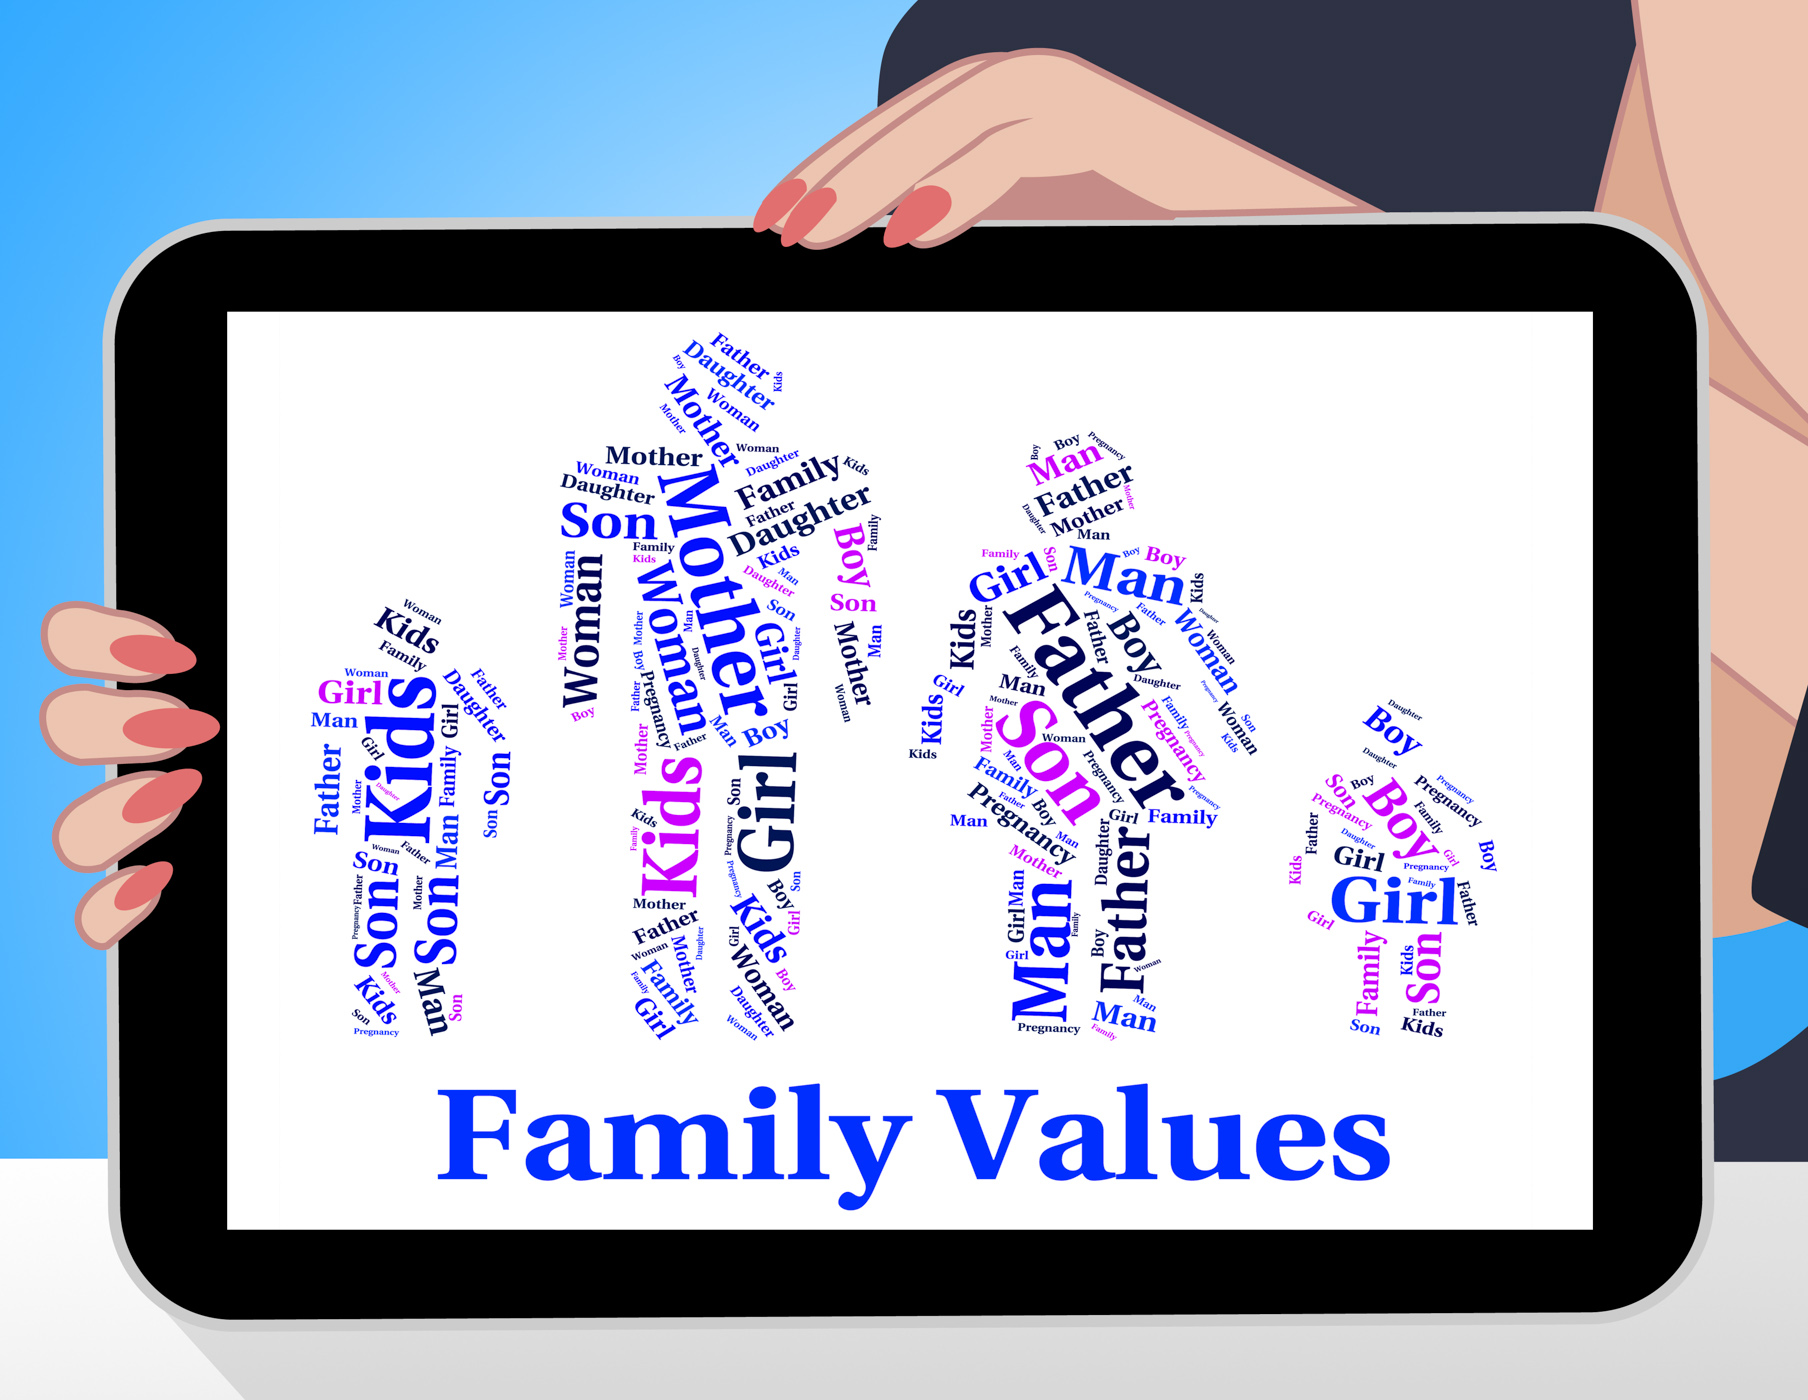 Family values shows blood relation and ethics photo